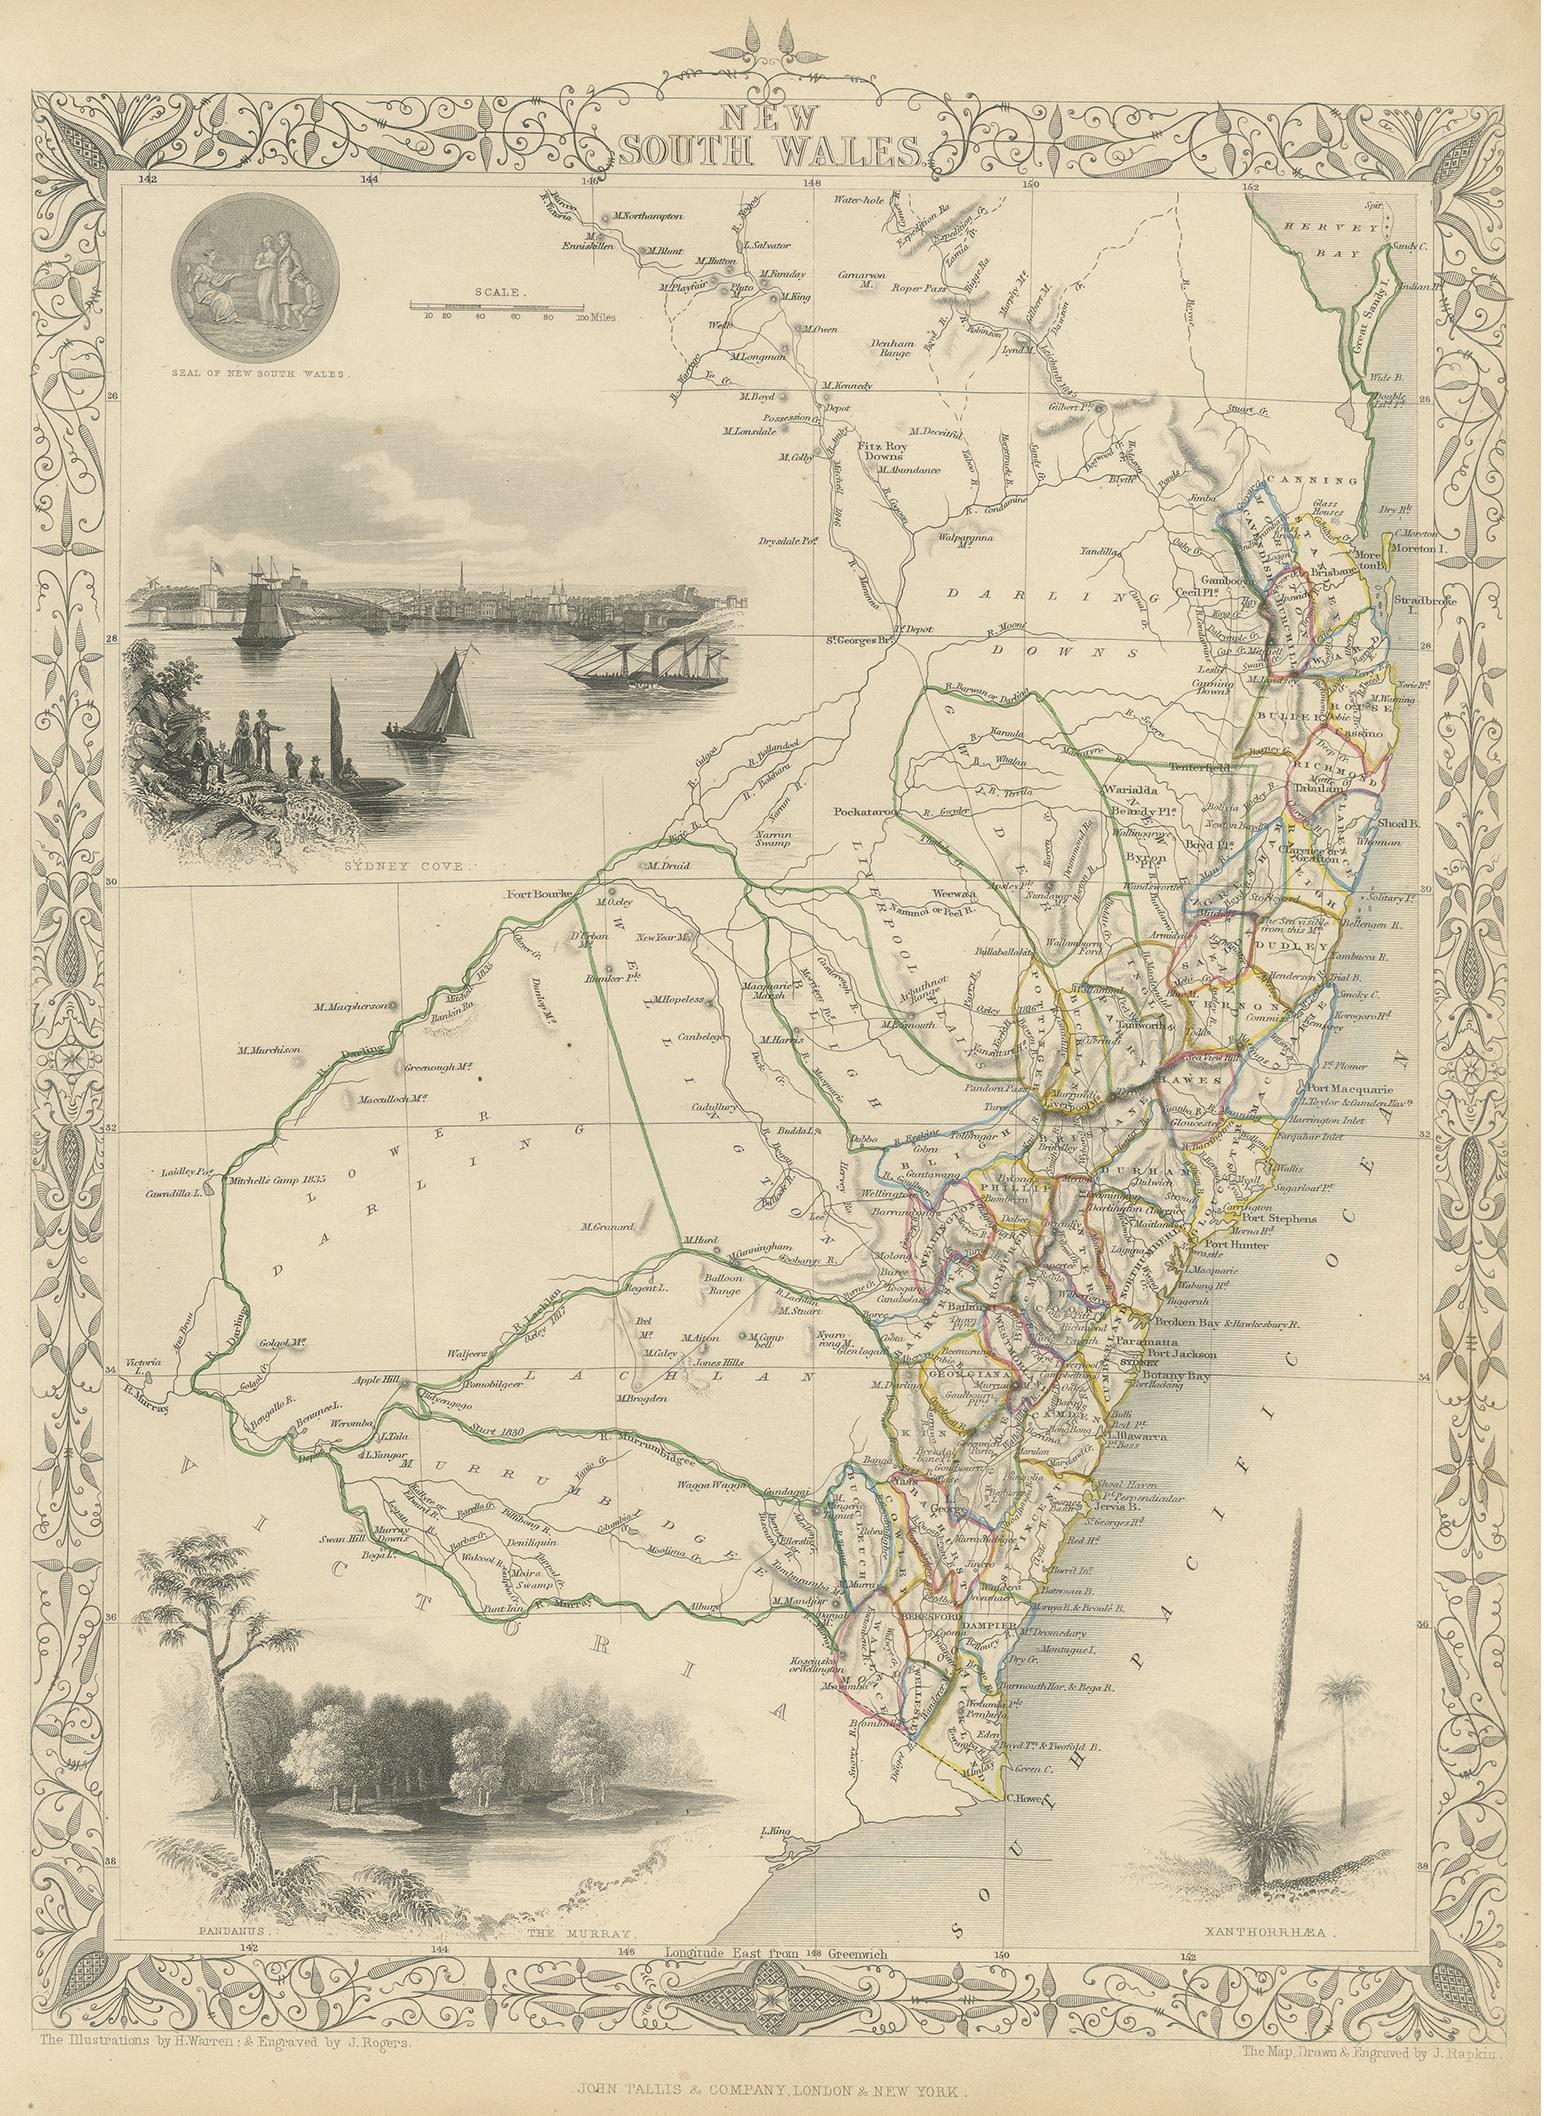 Antique map titled 'New South Wales'. Decorative and detailed map of New South Wales which was drawn and engraved by J. Rapkin (vignettes by H. Warren & J. Rogers) and published in John Tallis's Illustrated Atlas (London & New York: John Tallis &